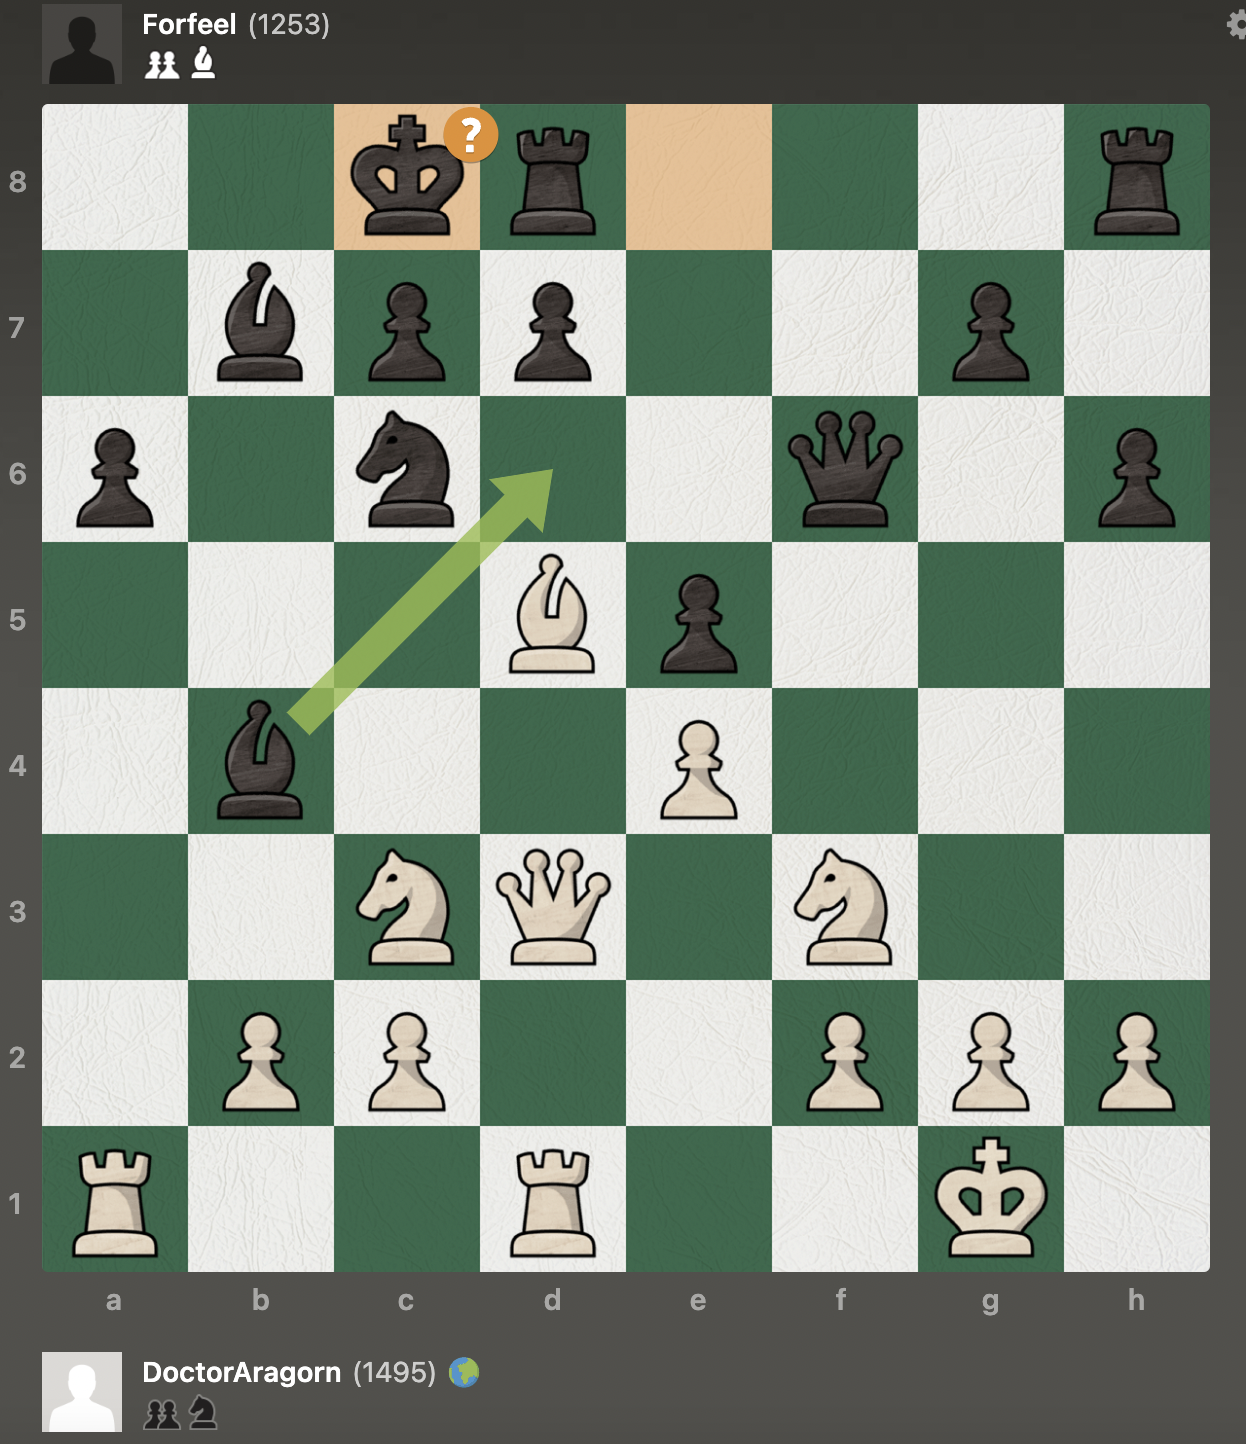 Complete this Move! Start Strong with the Alekhine Defense!